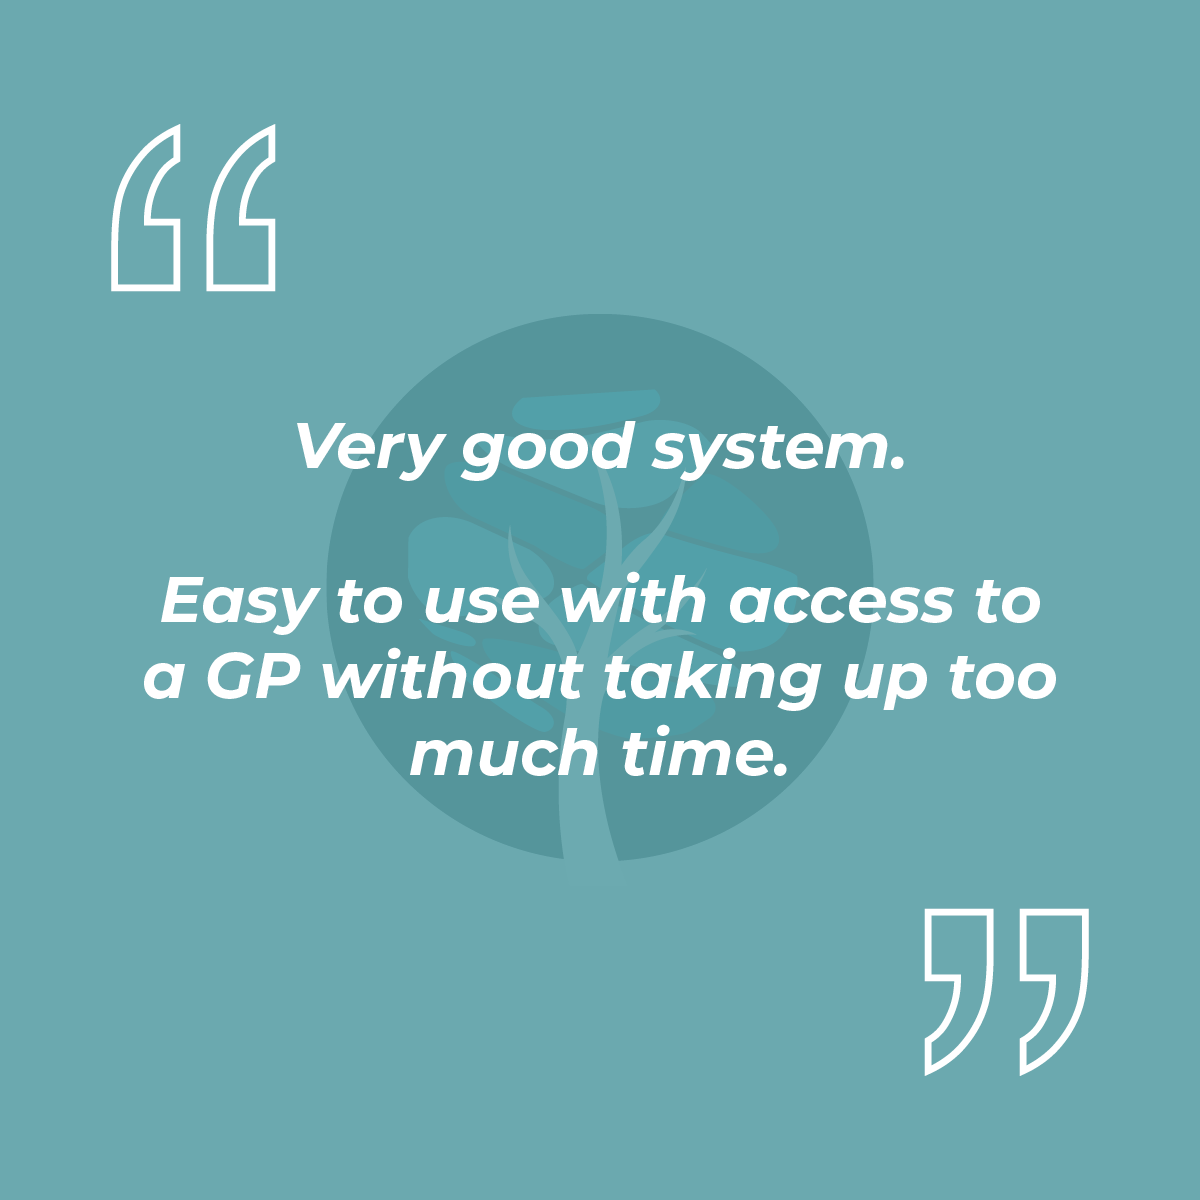 Very good system. Easy to use with access to a GP without taking up too much time.